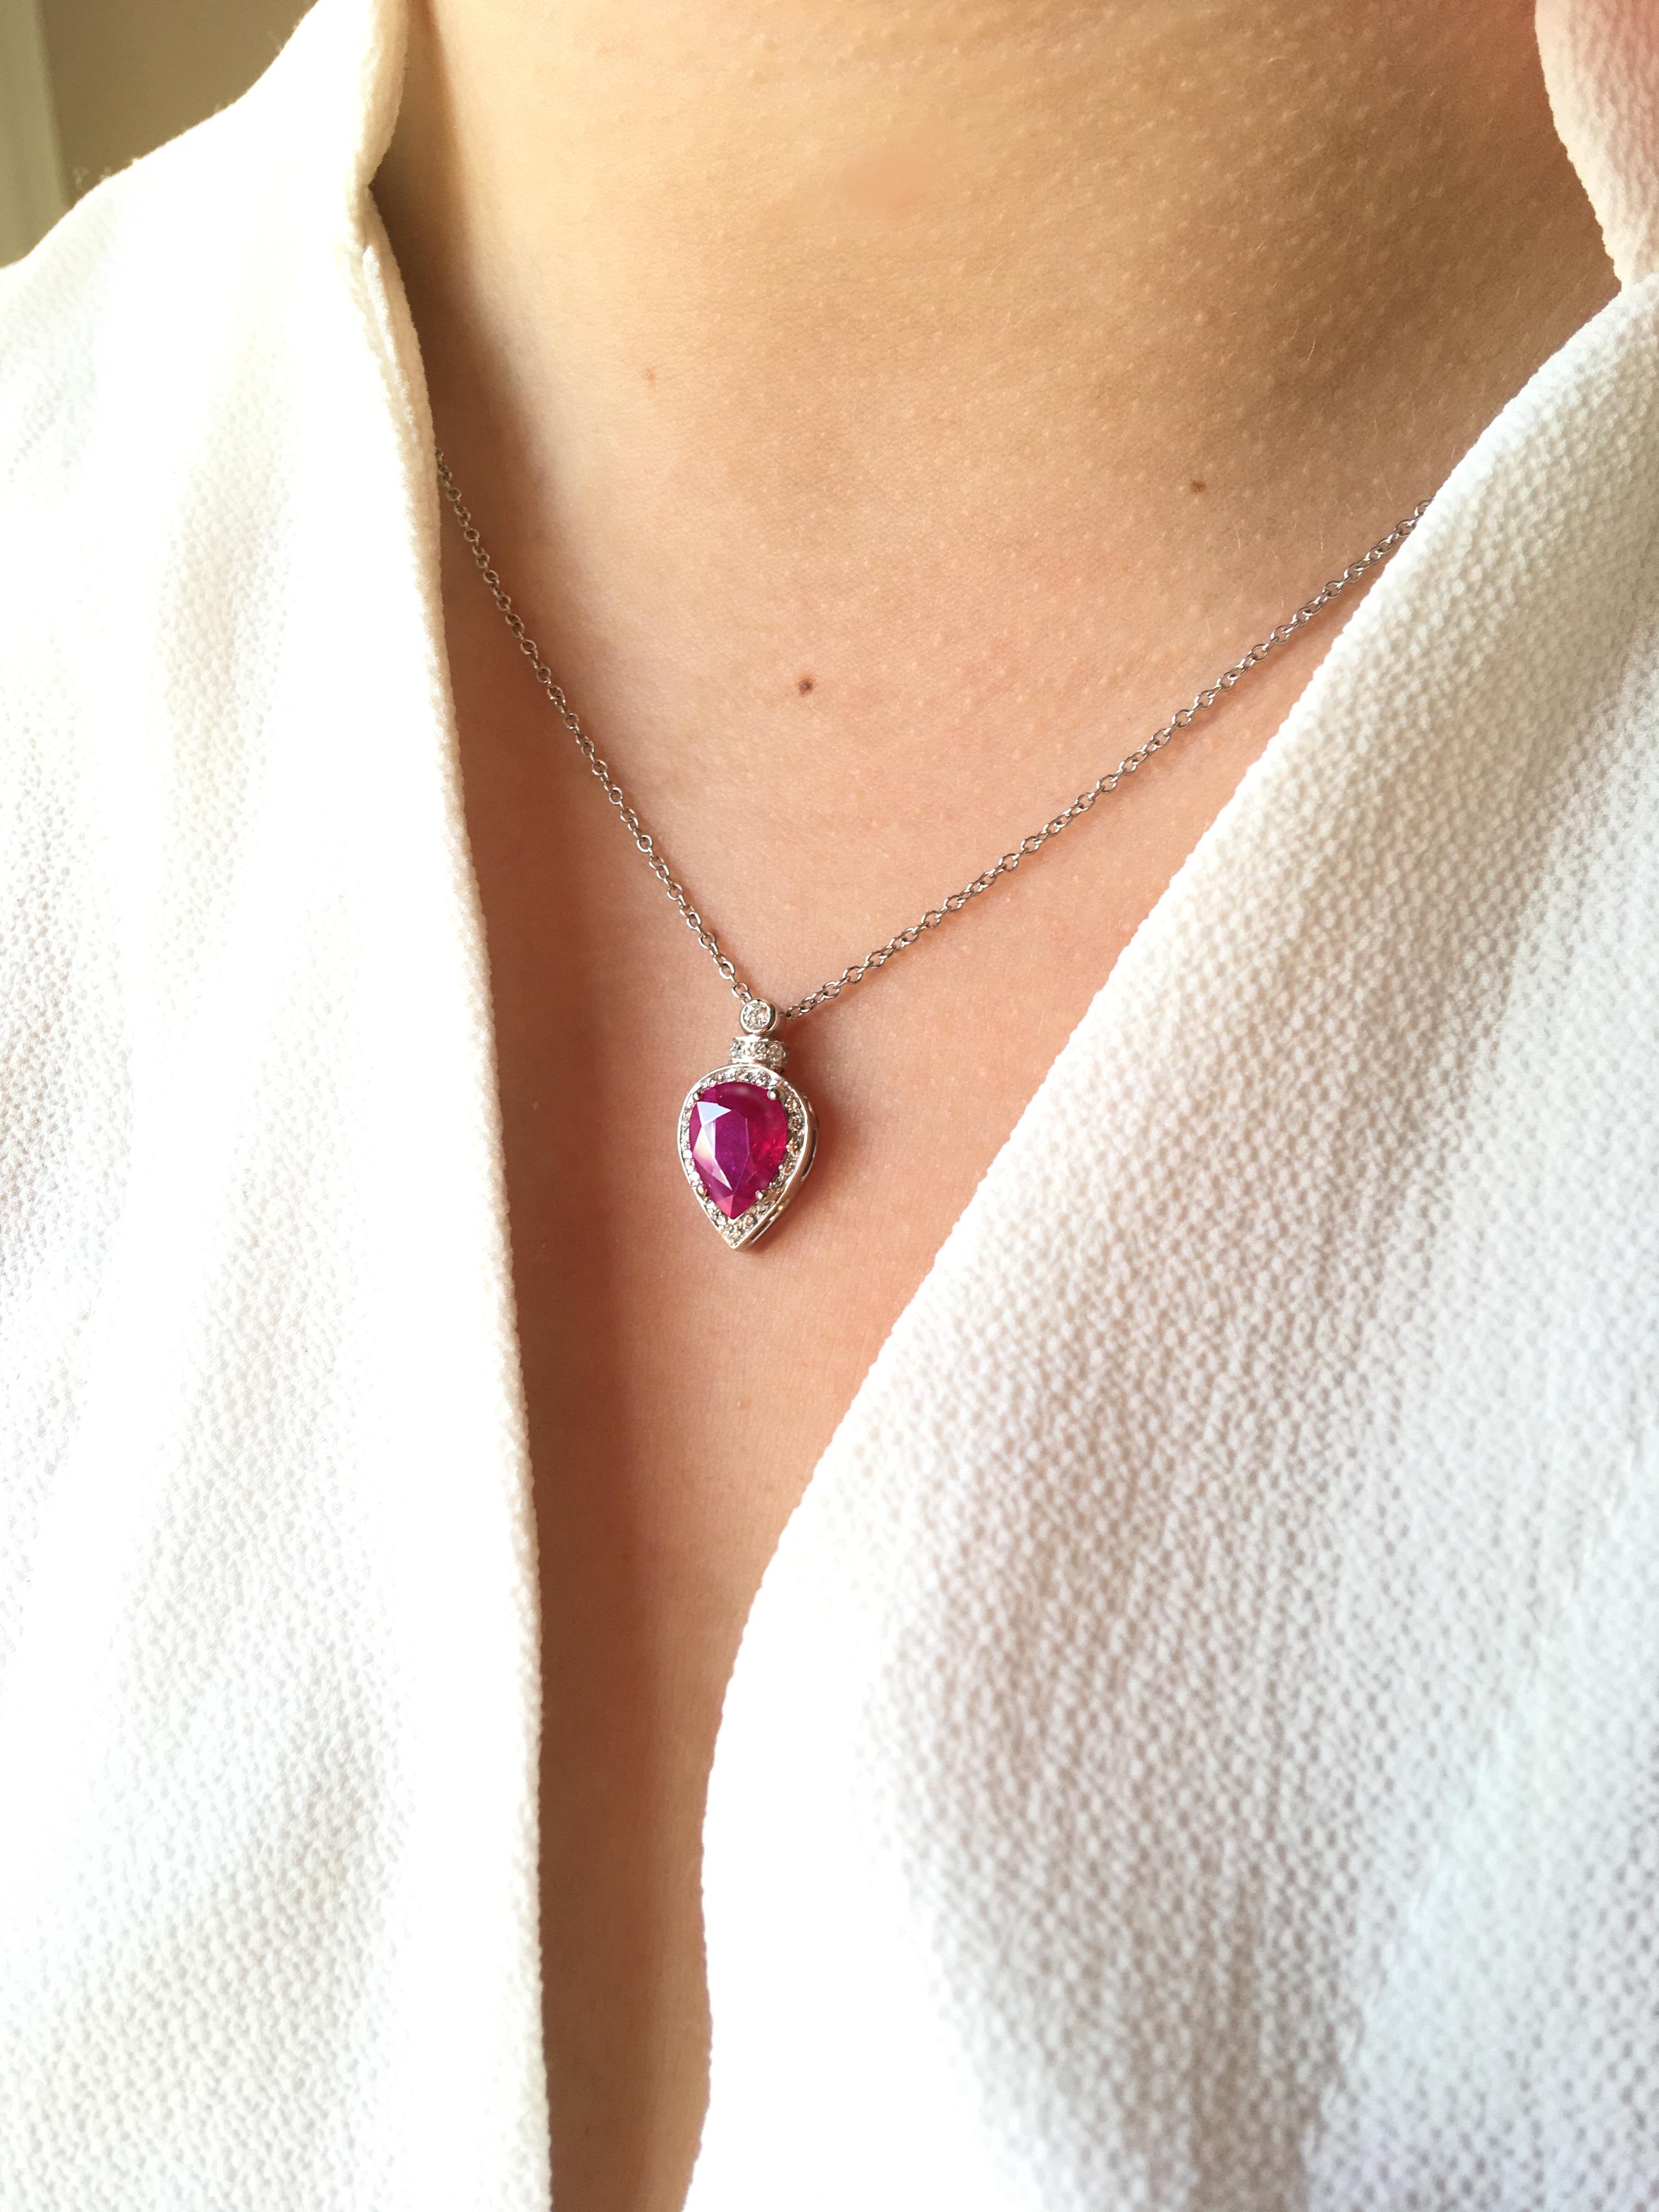  2.60 Karat Ruby 0,20 White Diamonds 18 Karat White Gold Chain Modern Necklace
This drop ruby necklace is handcrafted in 18 karats  white gold and embellished with 0,30 Karats shiny white diamonds and a 2,60 karats deep red south African ruby, a